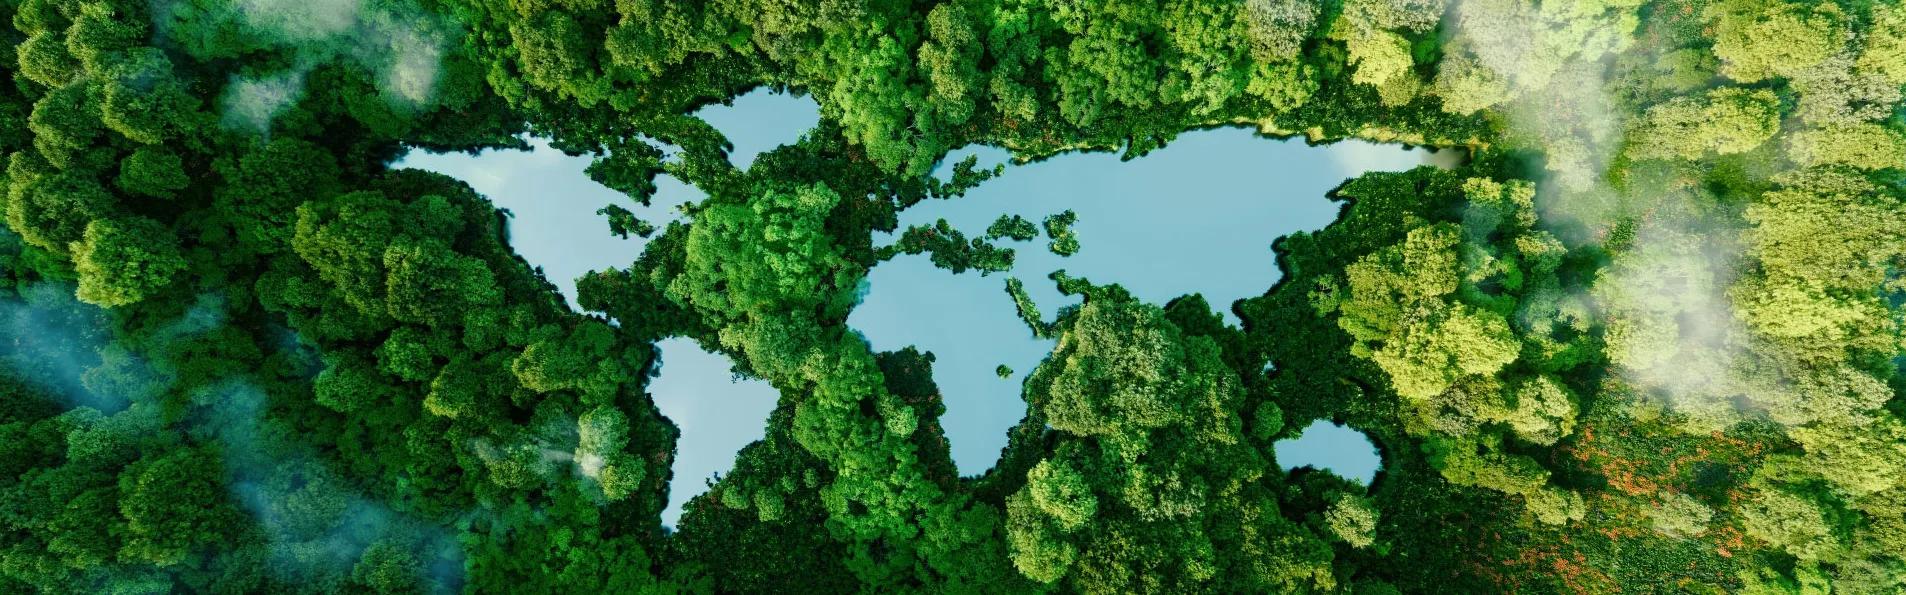 The world shaped into a forest